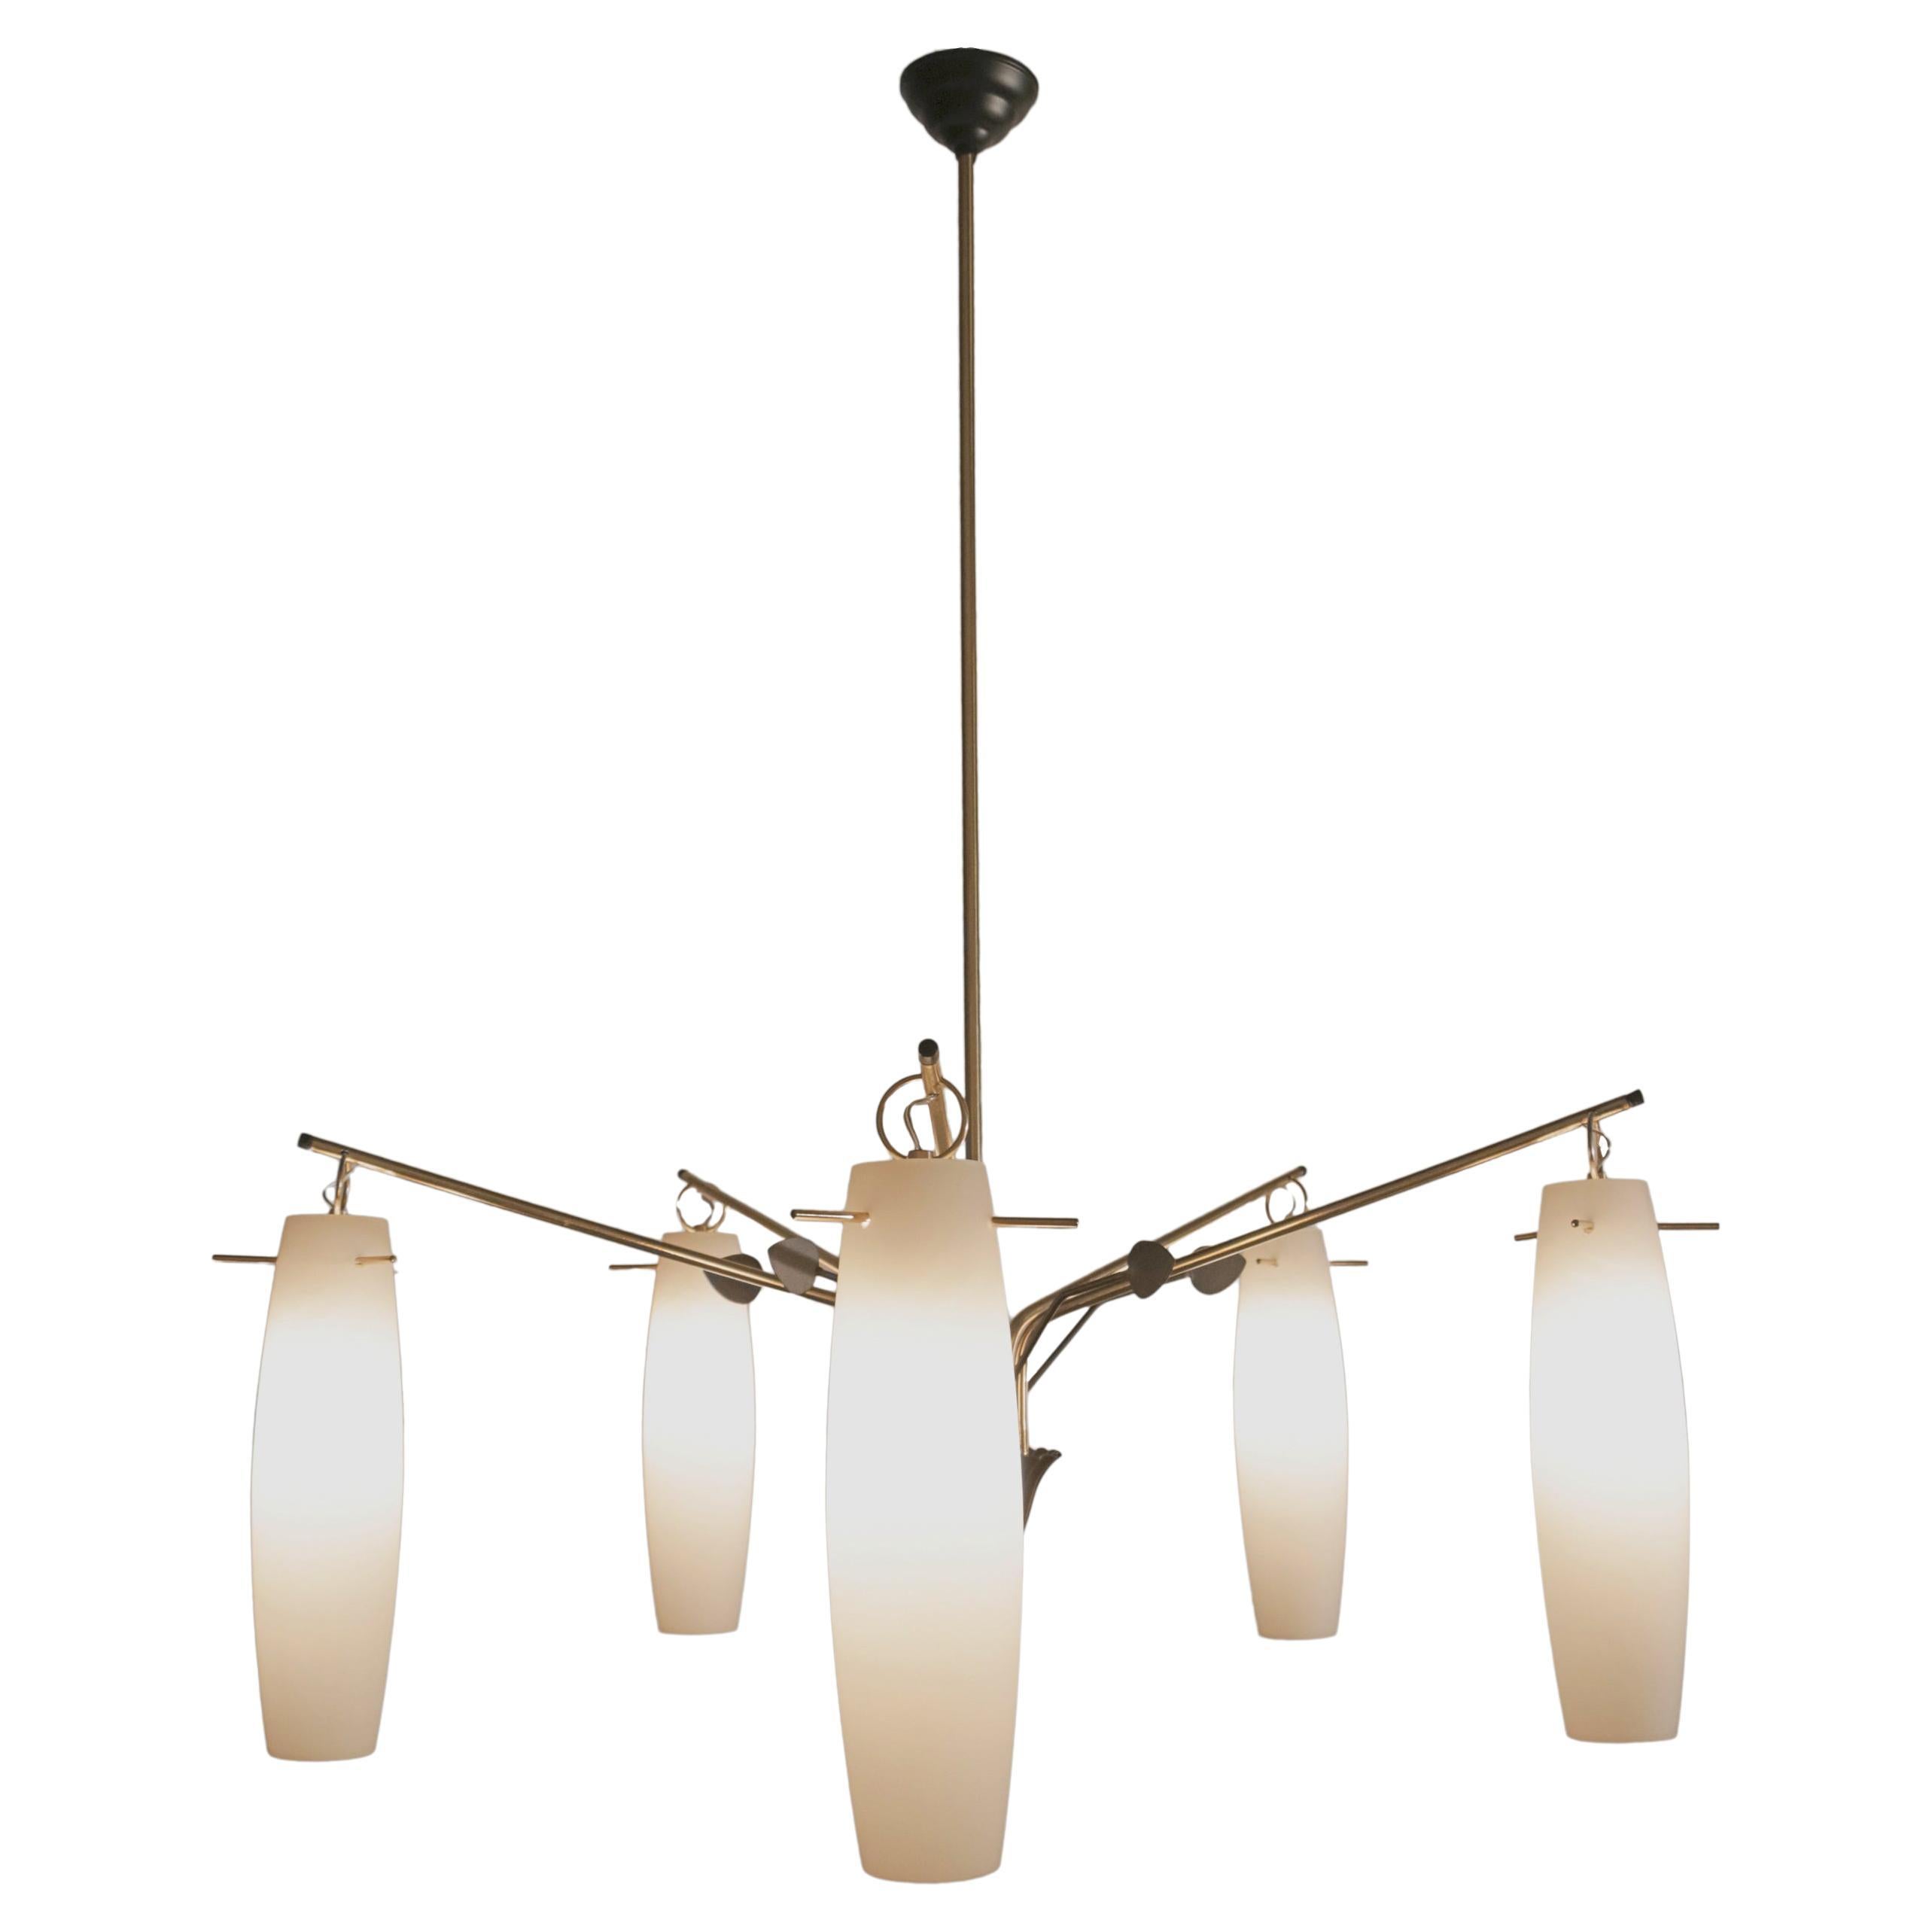 Italian mid-century large chandelier in polished brass, black-painted aluminium with opal glasses, attributed to Stilnovo Fashion House, from the 1960s. The restoration was made with great care by a specialized craftsman to bring back this piece's